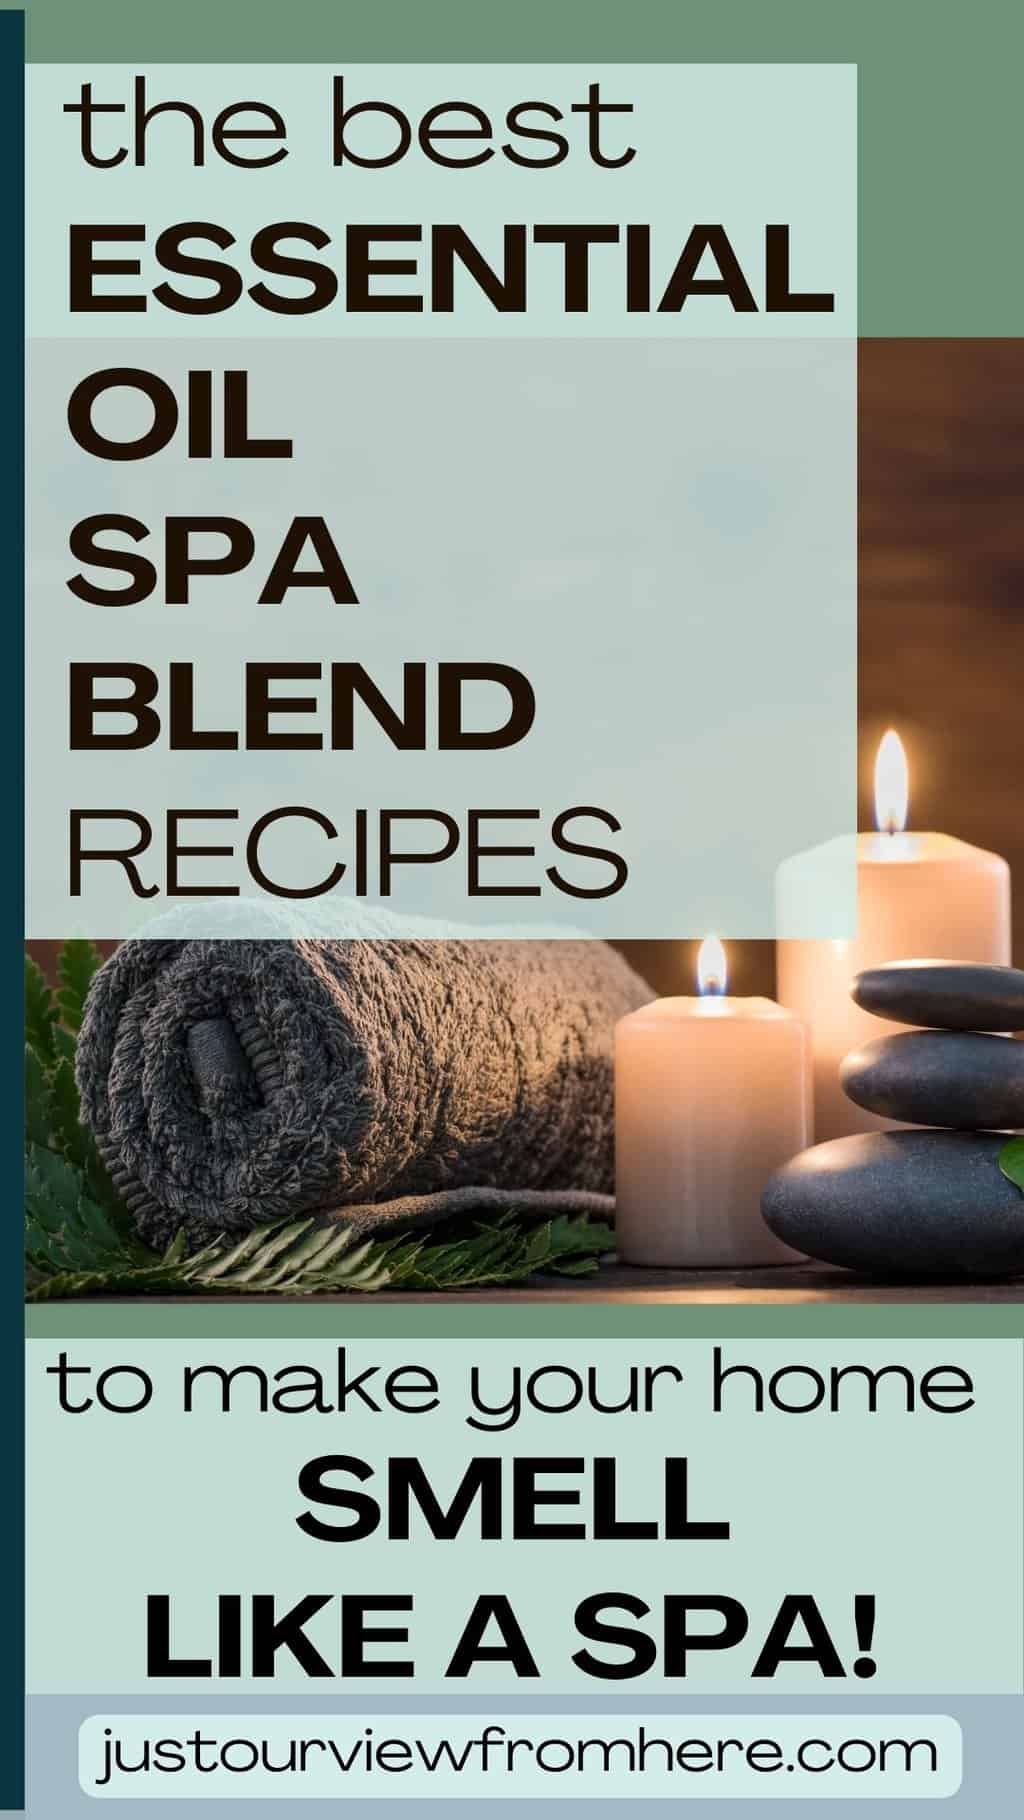 the best essential oil spa blend recipes to make your home smell like a spa